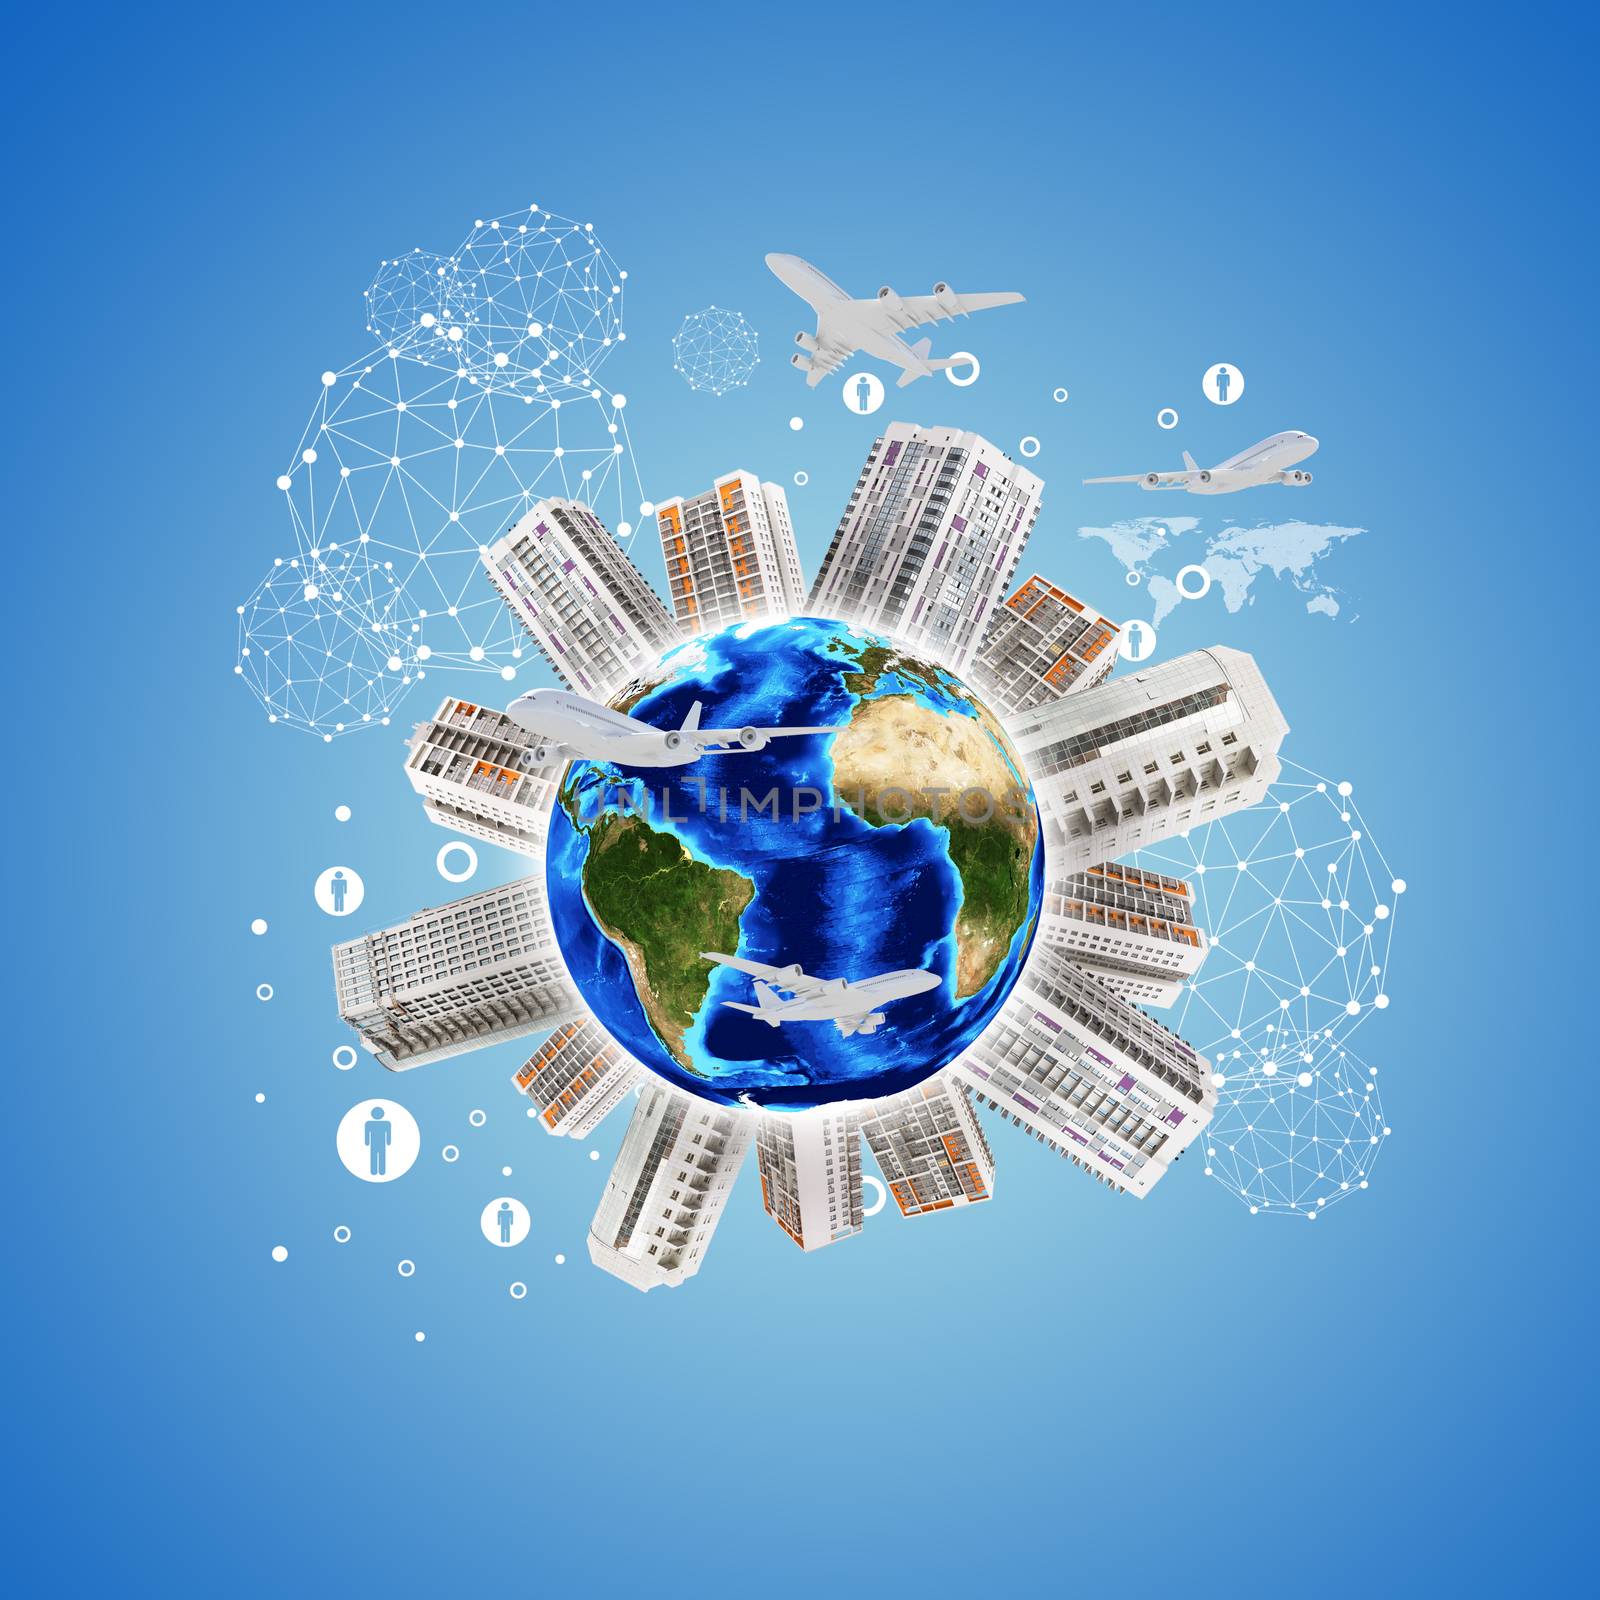 Earth planet image with buildings on surface. Airplane and network icons. Elements of this image are furnished by NASA